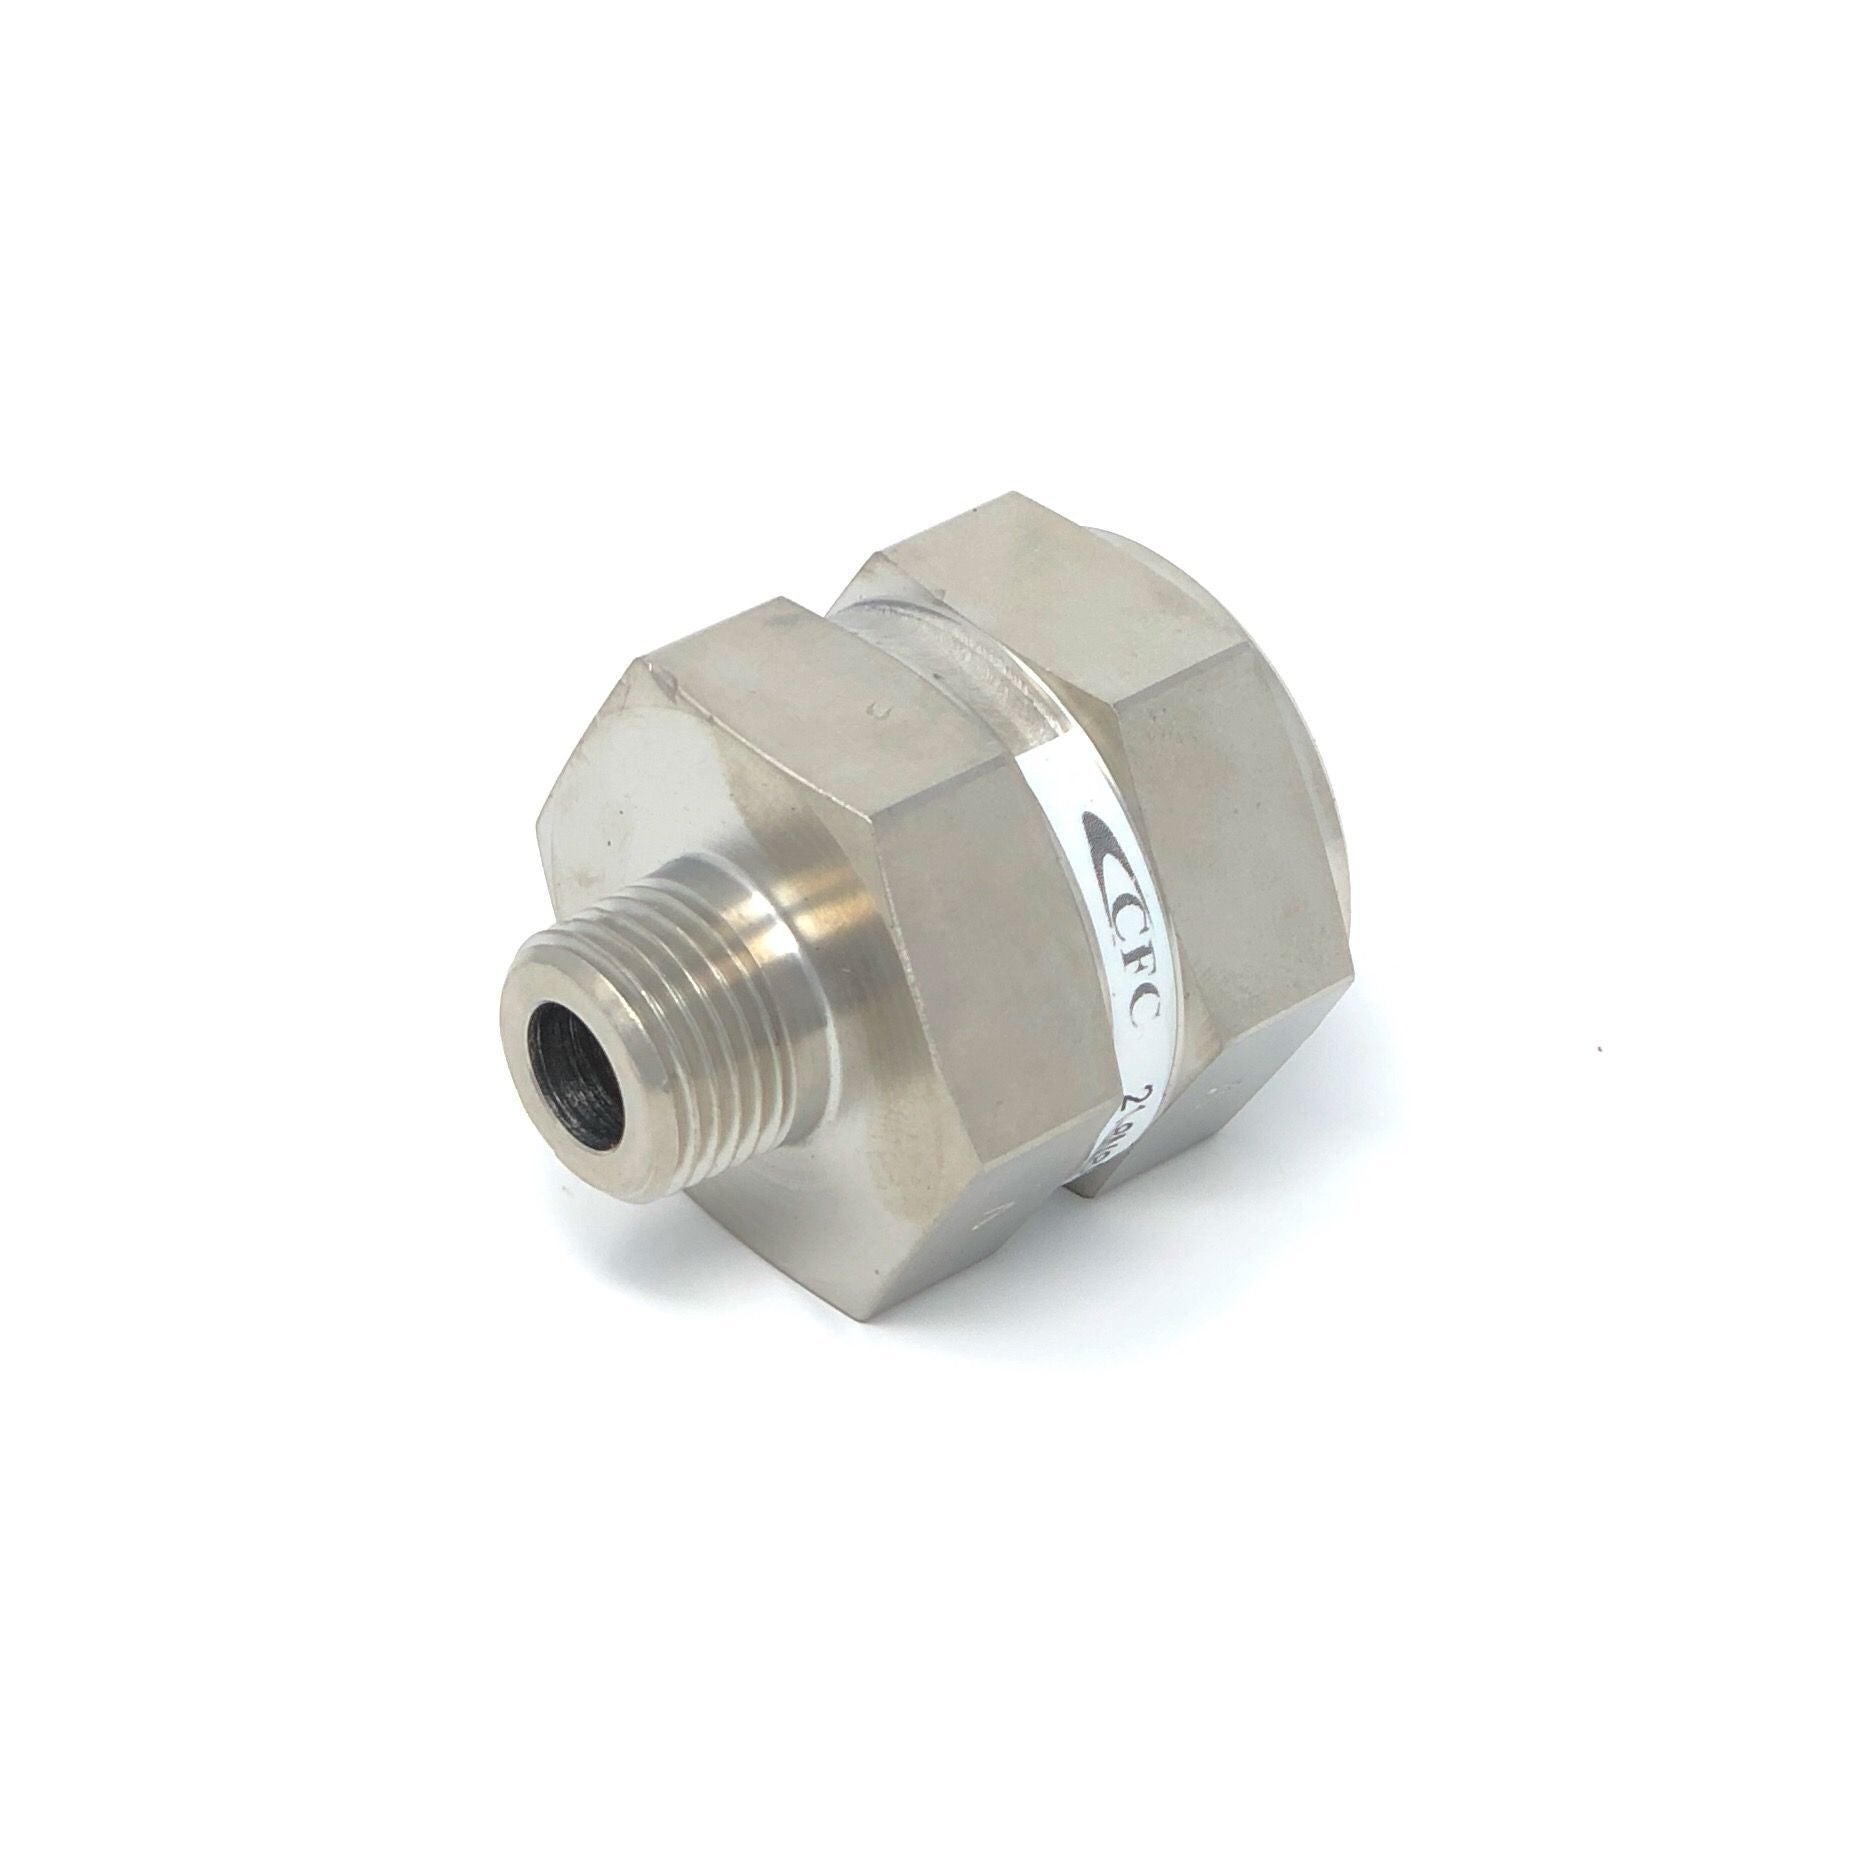 21-6M6M-100S : Chase High Pressure Inline Filter, 6000psi, #6 SAE (3/8"), 100 Micron, No Visual Indicator, No Bypass